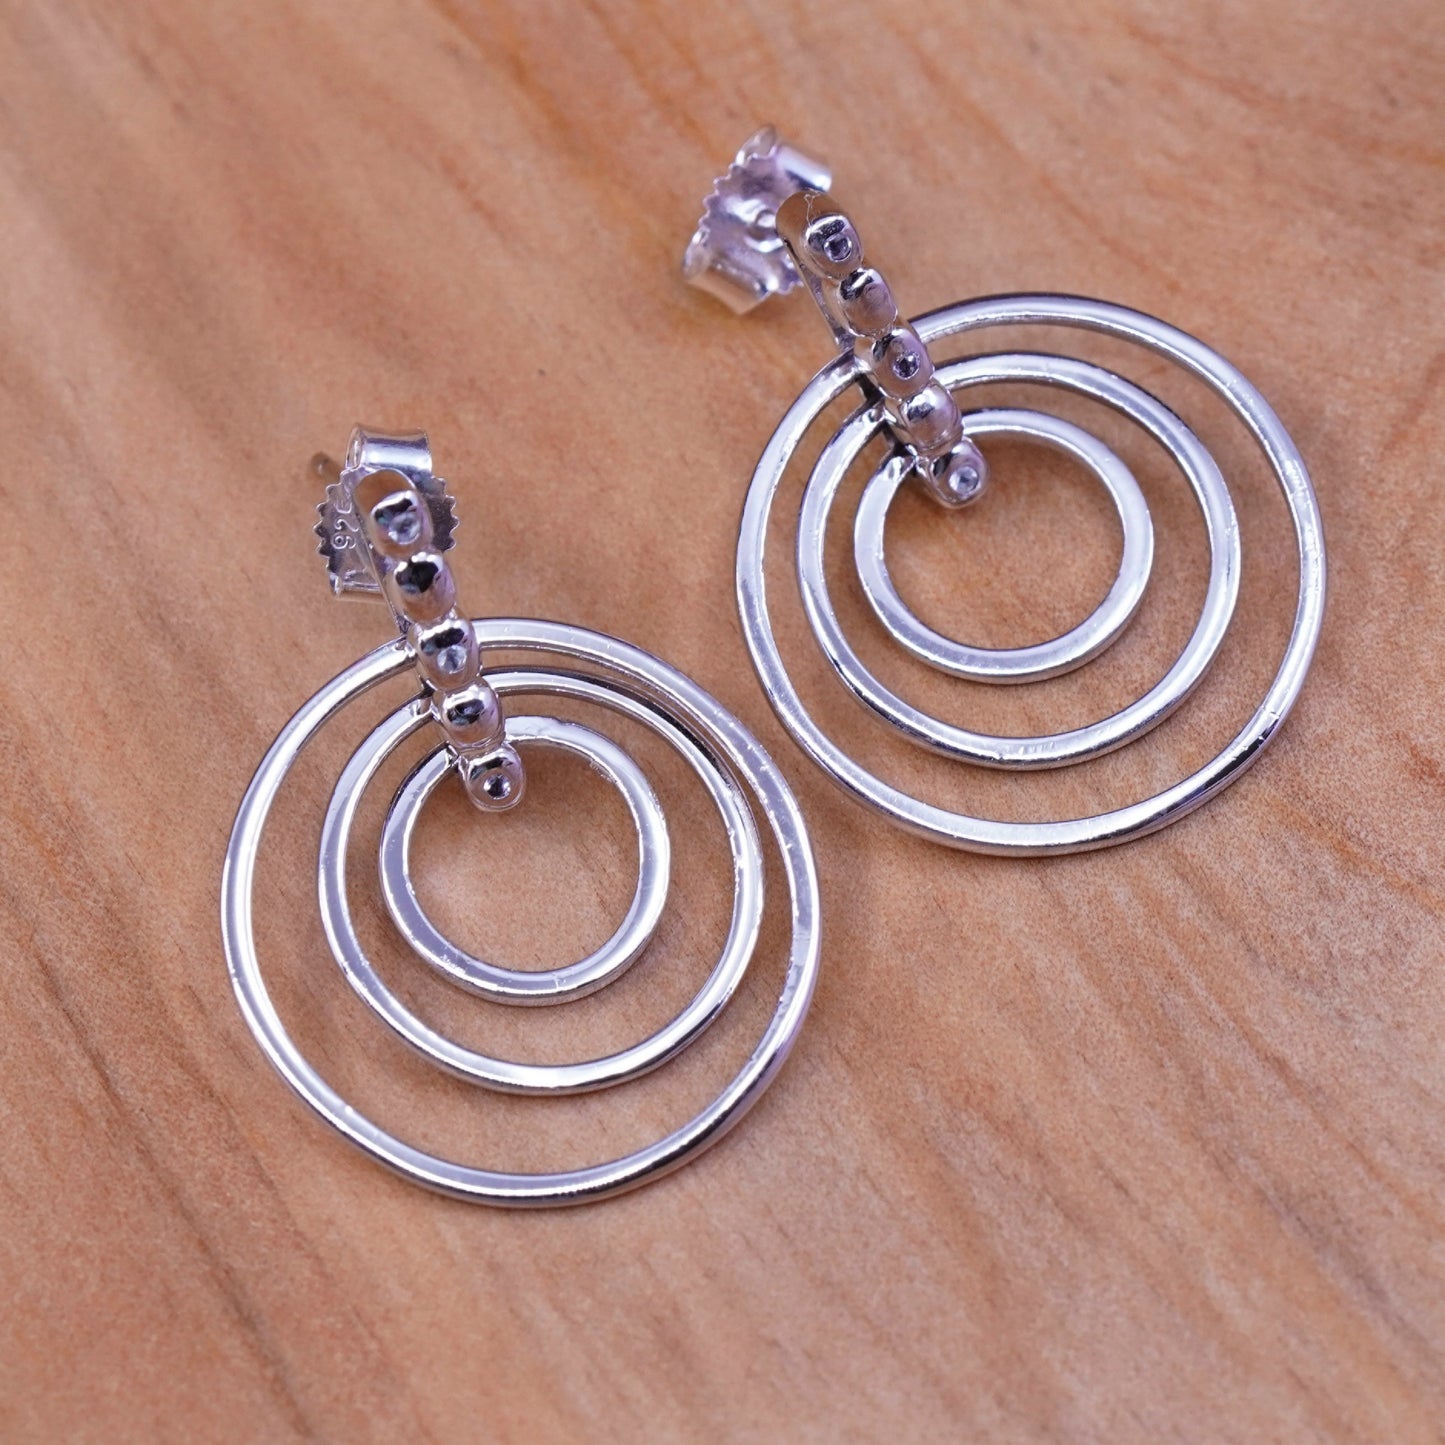 Vintage Sterling silver handmade earrings, 925 multi circles dangles with Cz